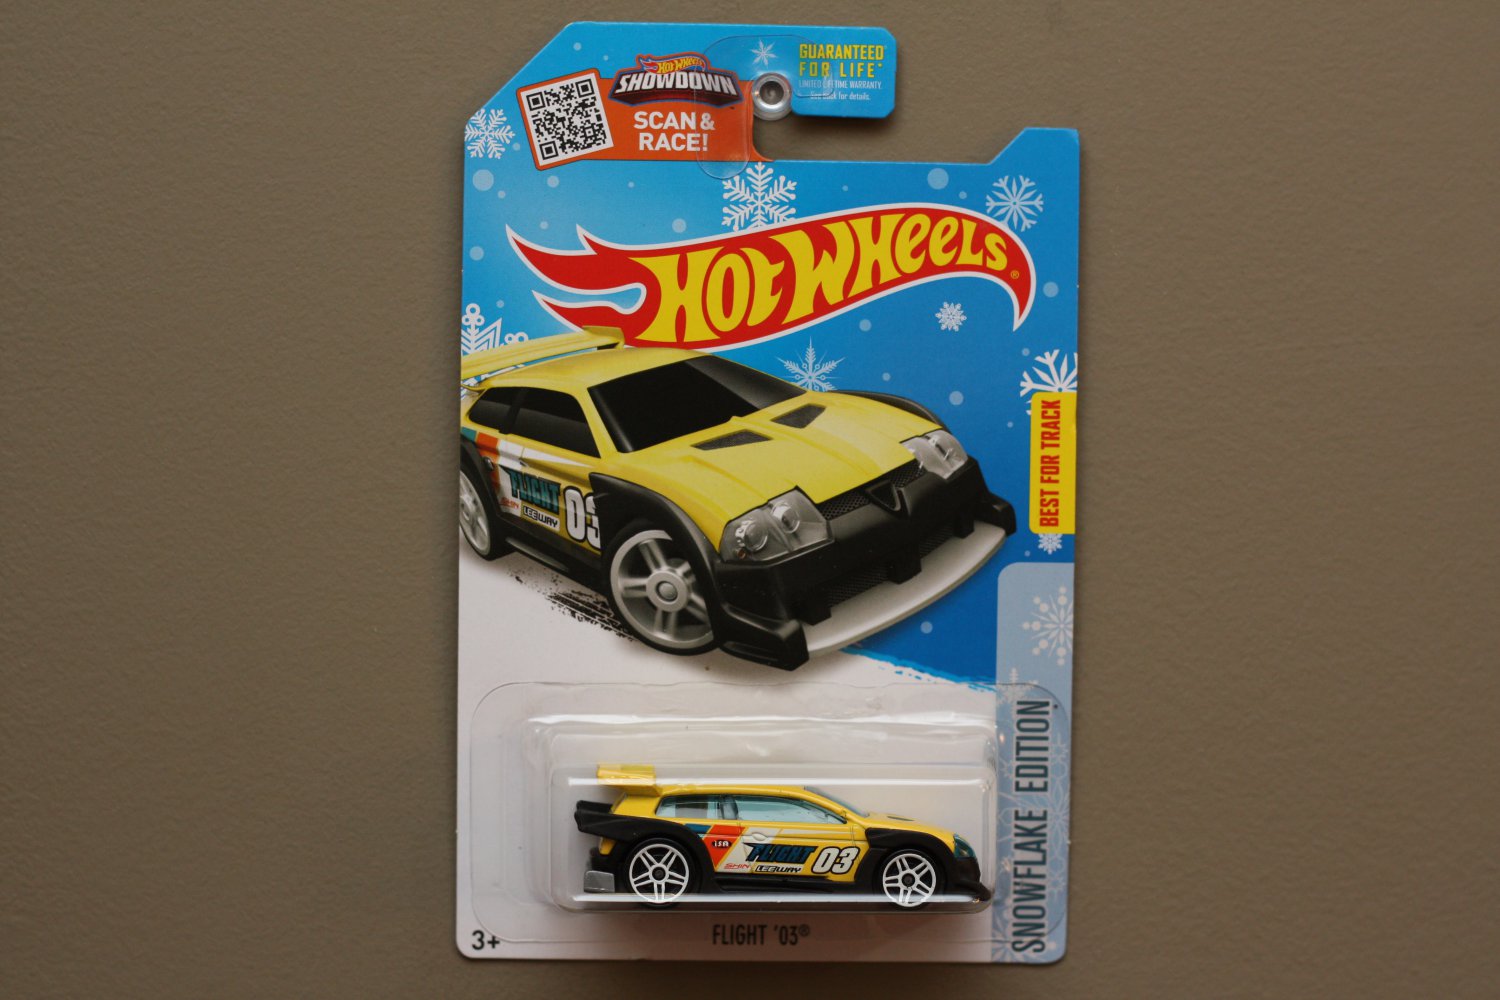 Hot Wheels 2016 Snowflake Edition Flight 03 (Target Excl.)